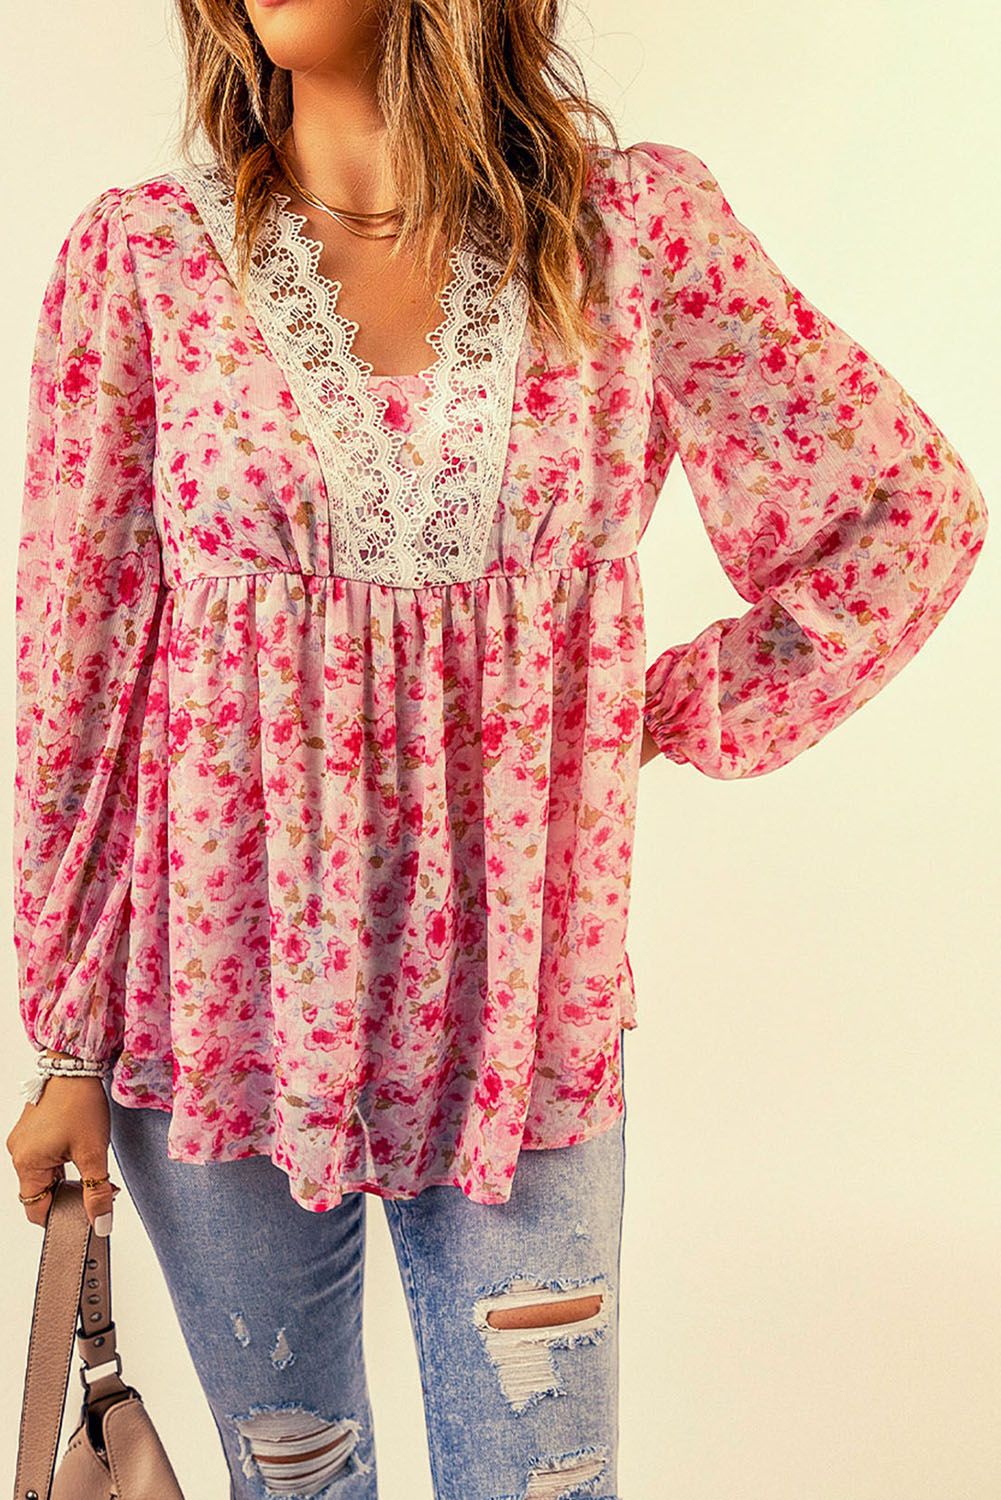 Floral Lace Trim Balloon Sleeve Blouse.